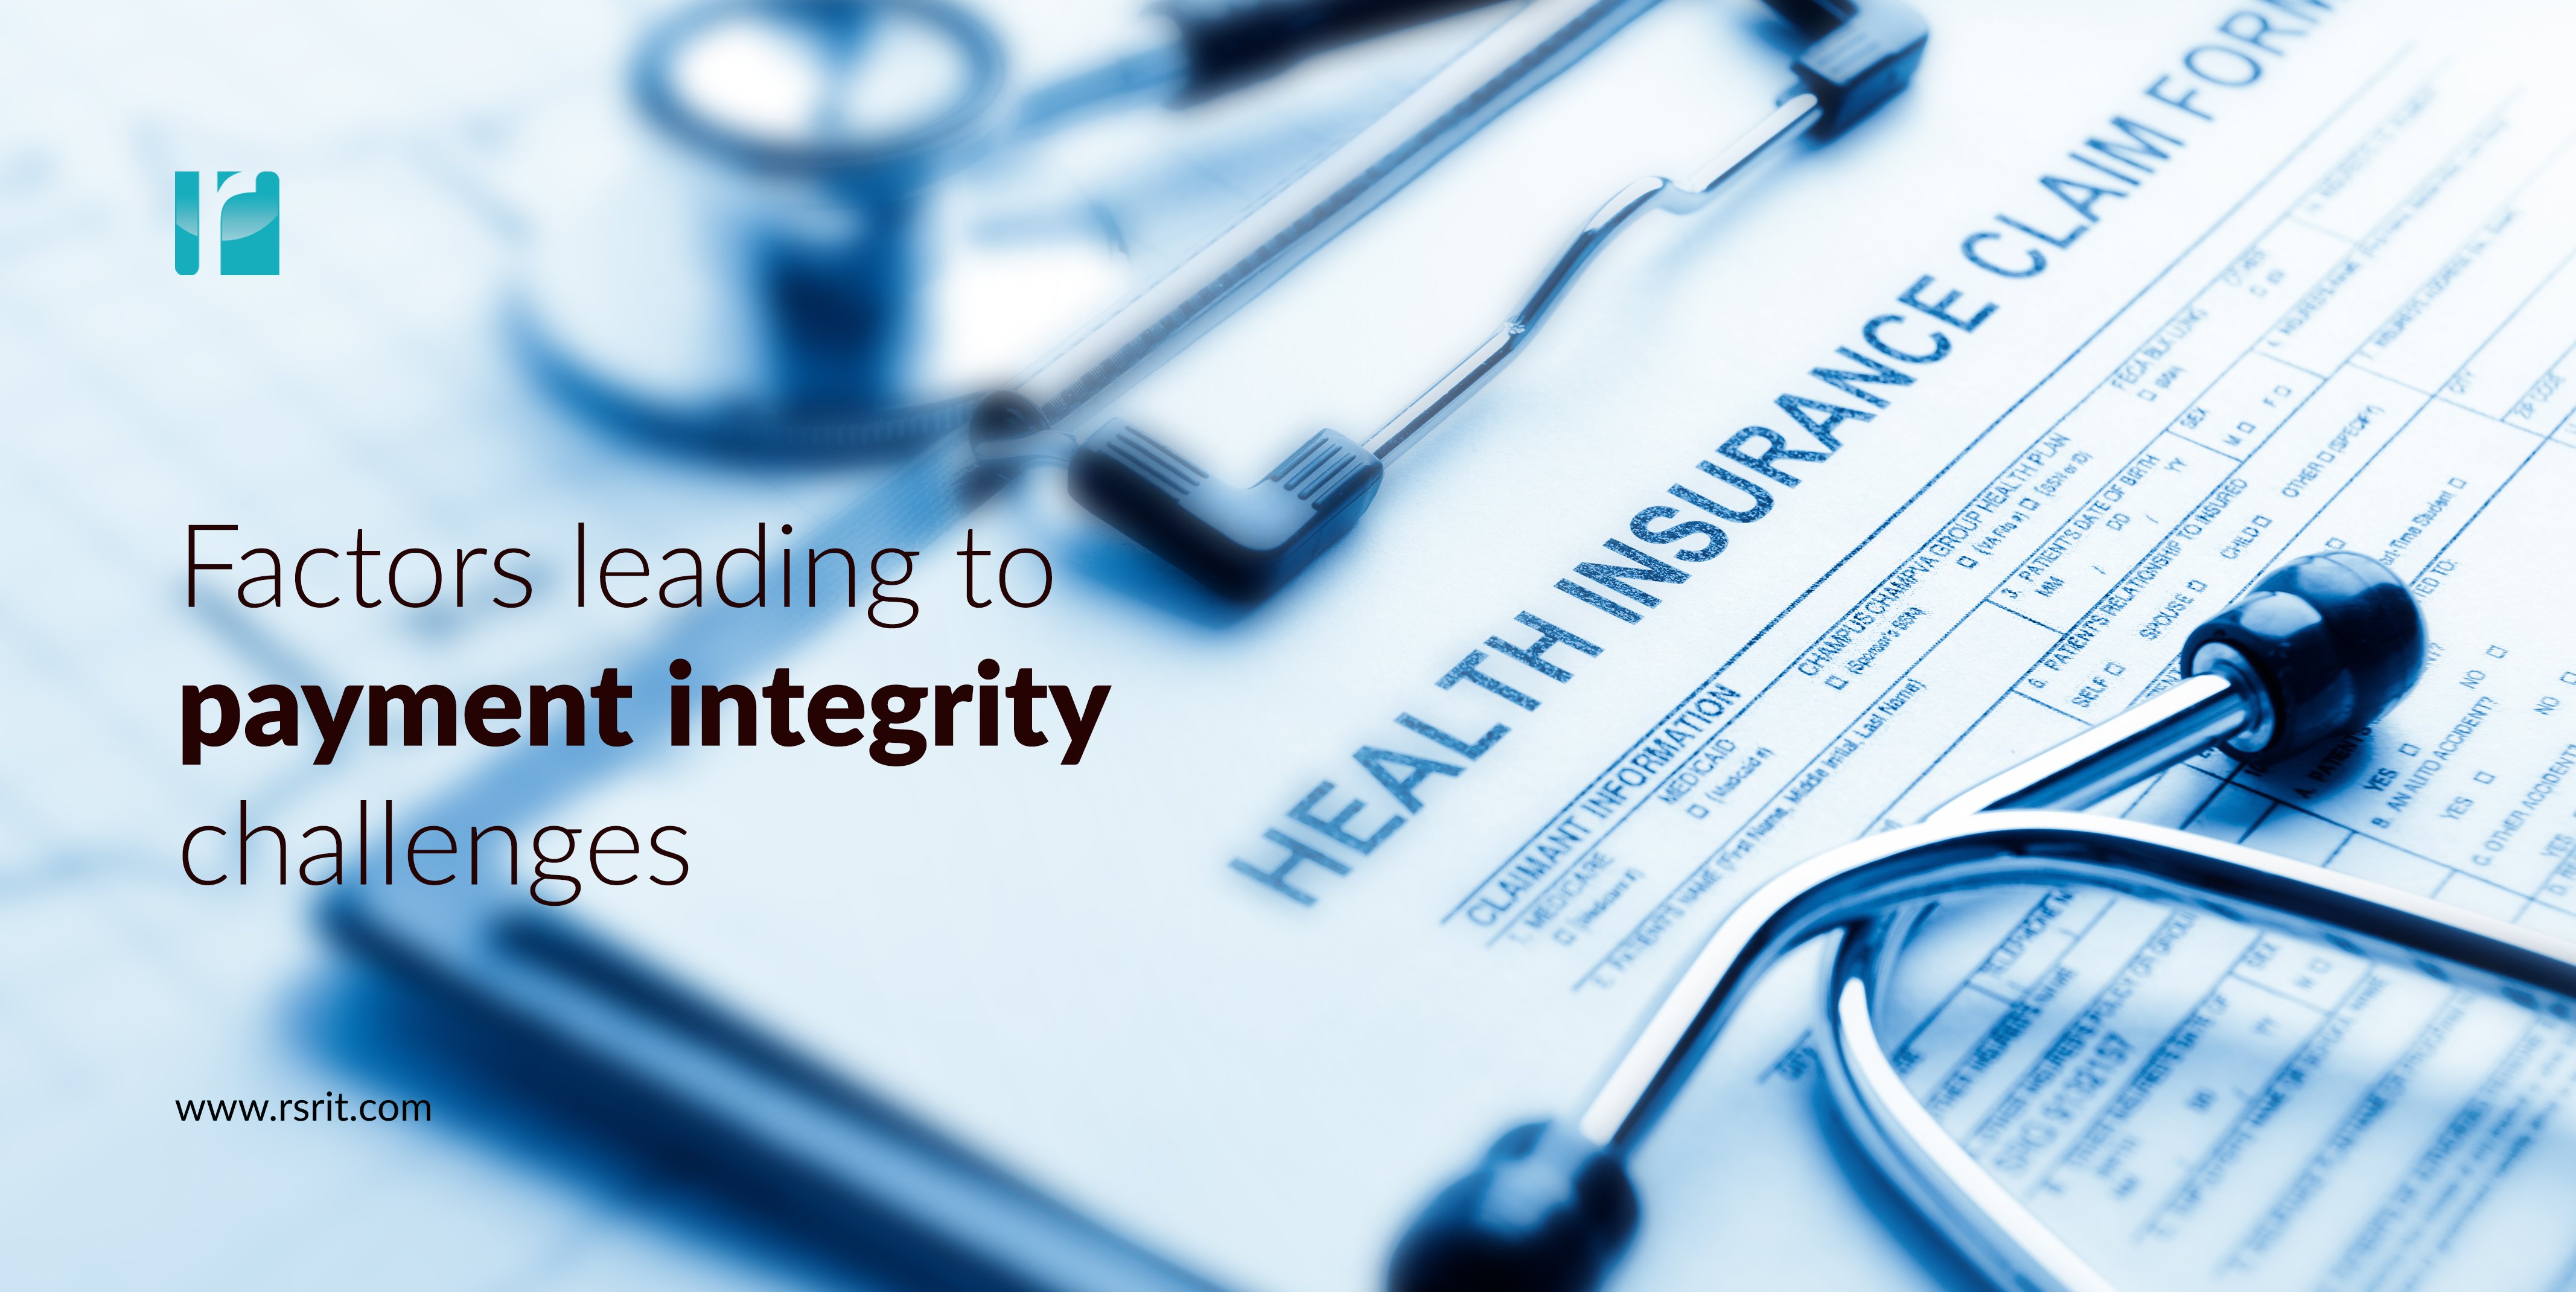 Factors leading to payment integrity challenges